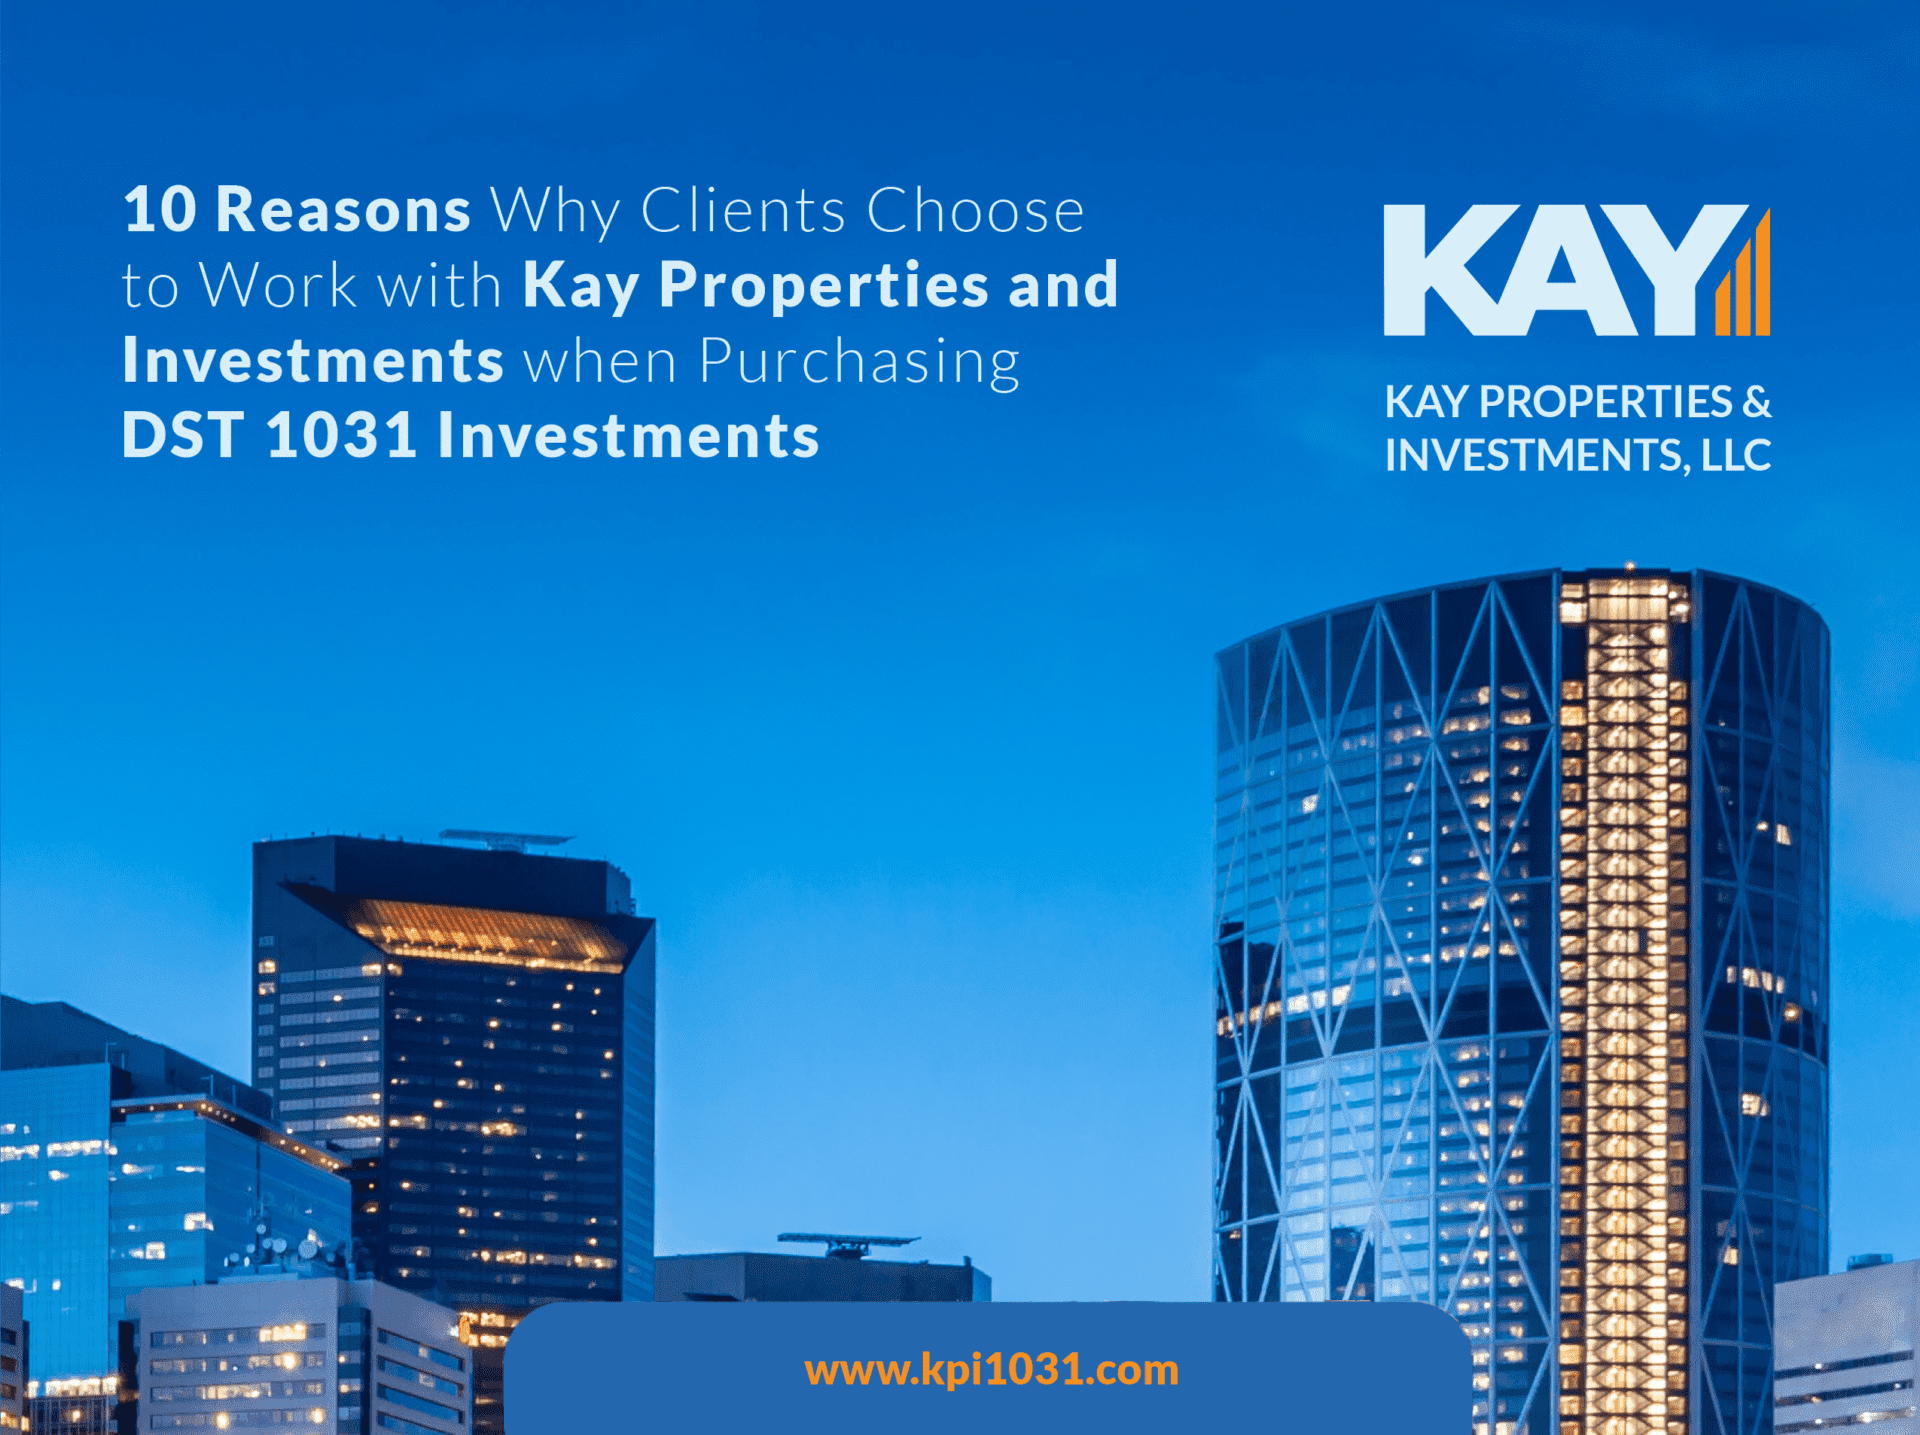 Featured image for “10 Reasons Why Clients Choose Kay Properties”